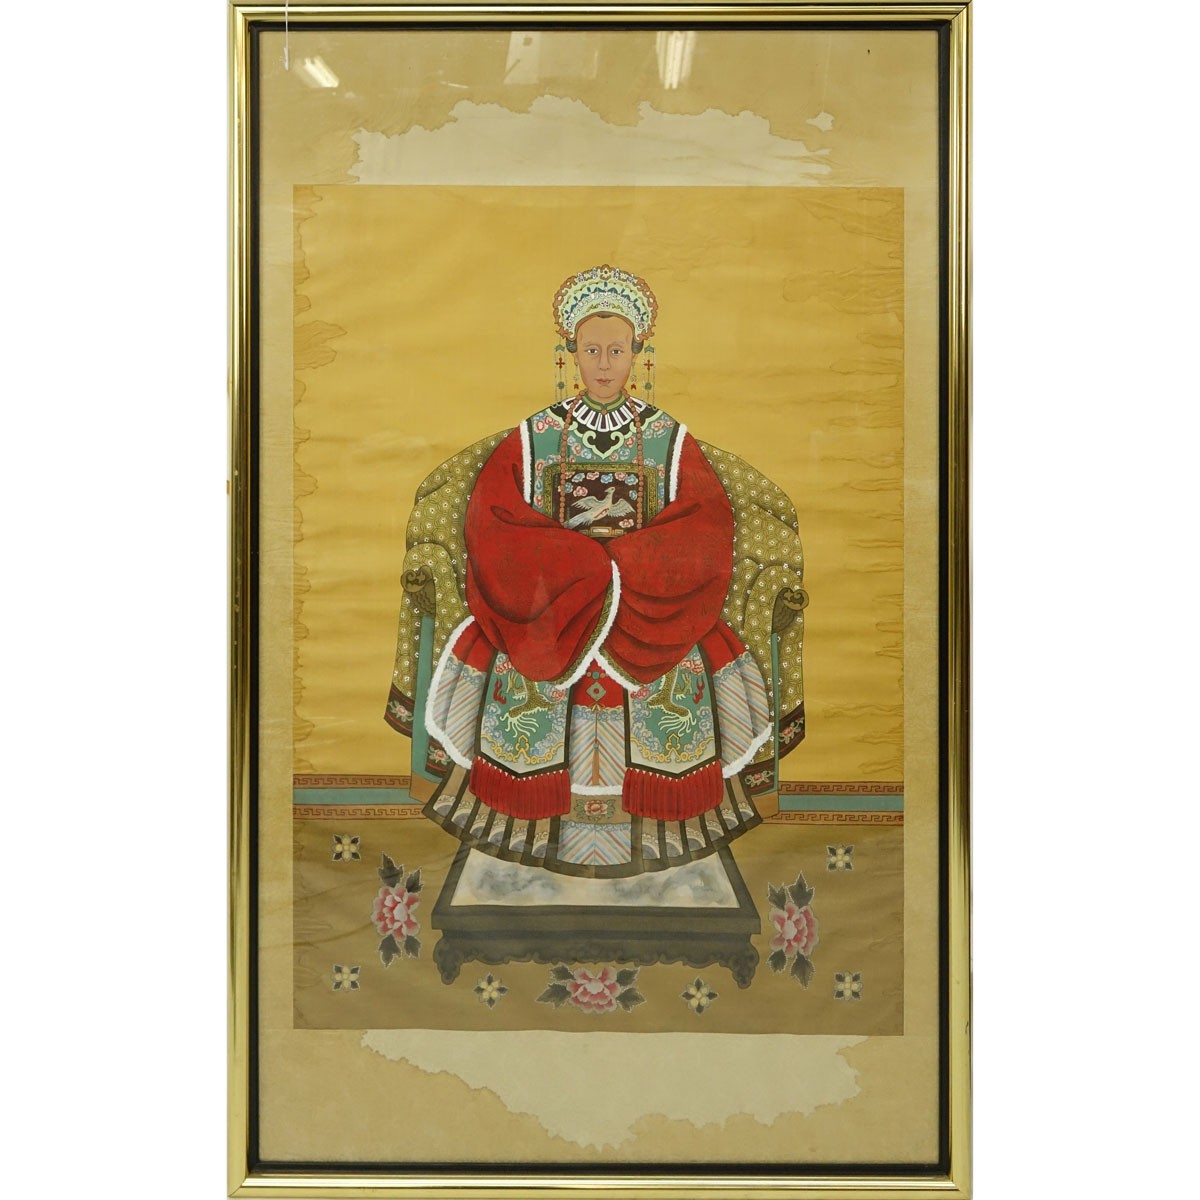 Large Antique Chinese Qing Dynasty Style Watercolor on Silk Scroll Painting, Seated Empress. Water stains to border otherwise good condition.